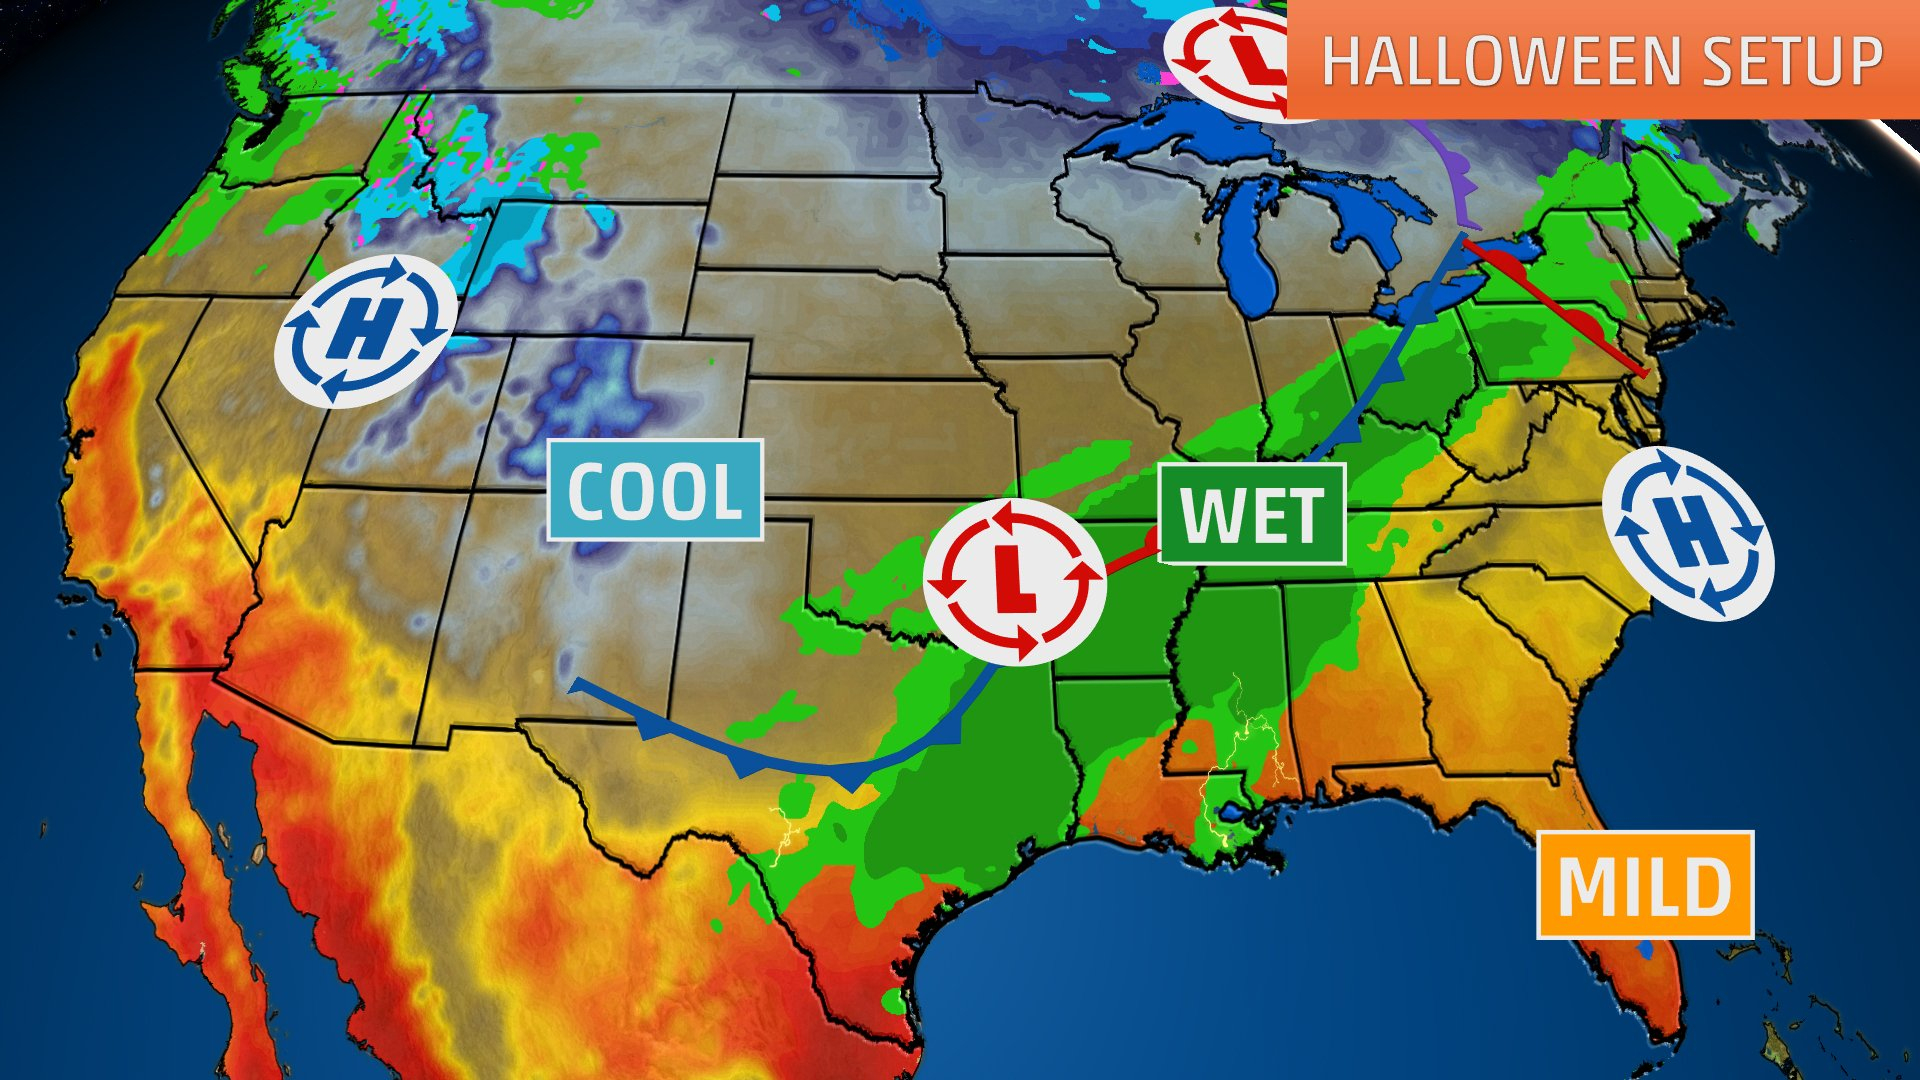 Halloween Weather Forecast: Wet Conditions From Texas To Ohio Valley - Texas Satellite Weather Map